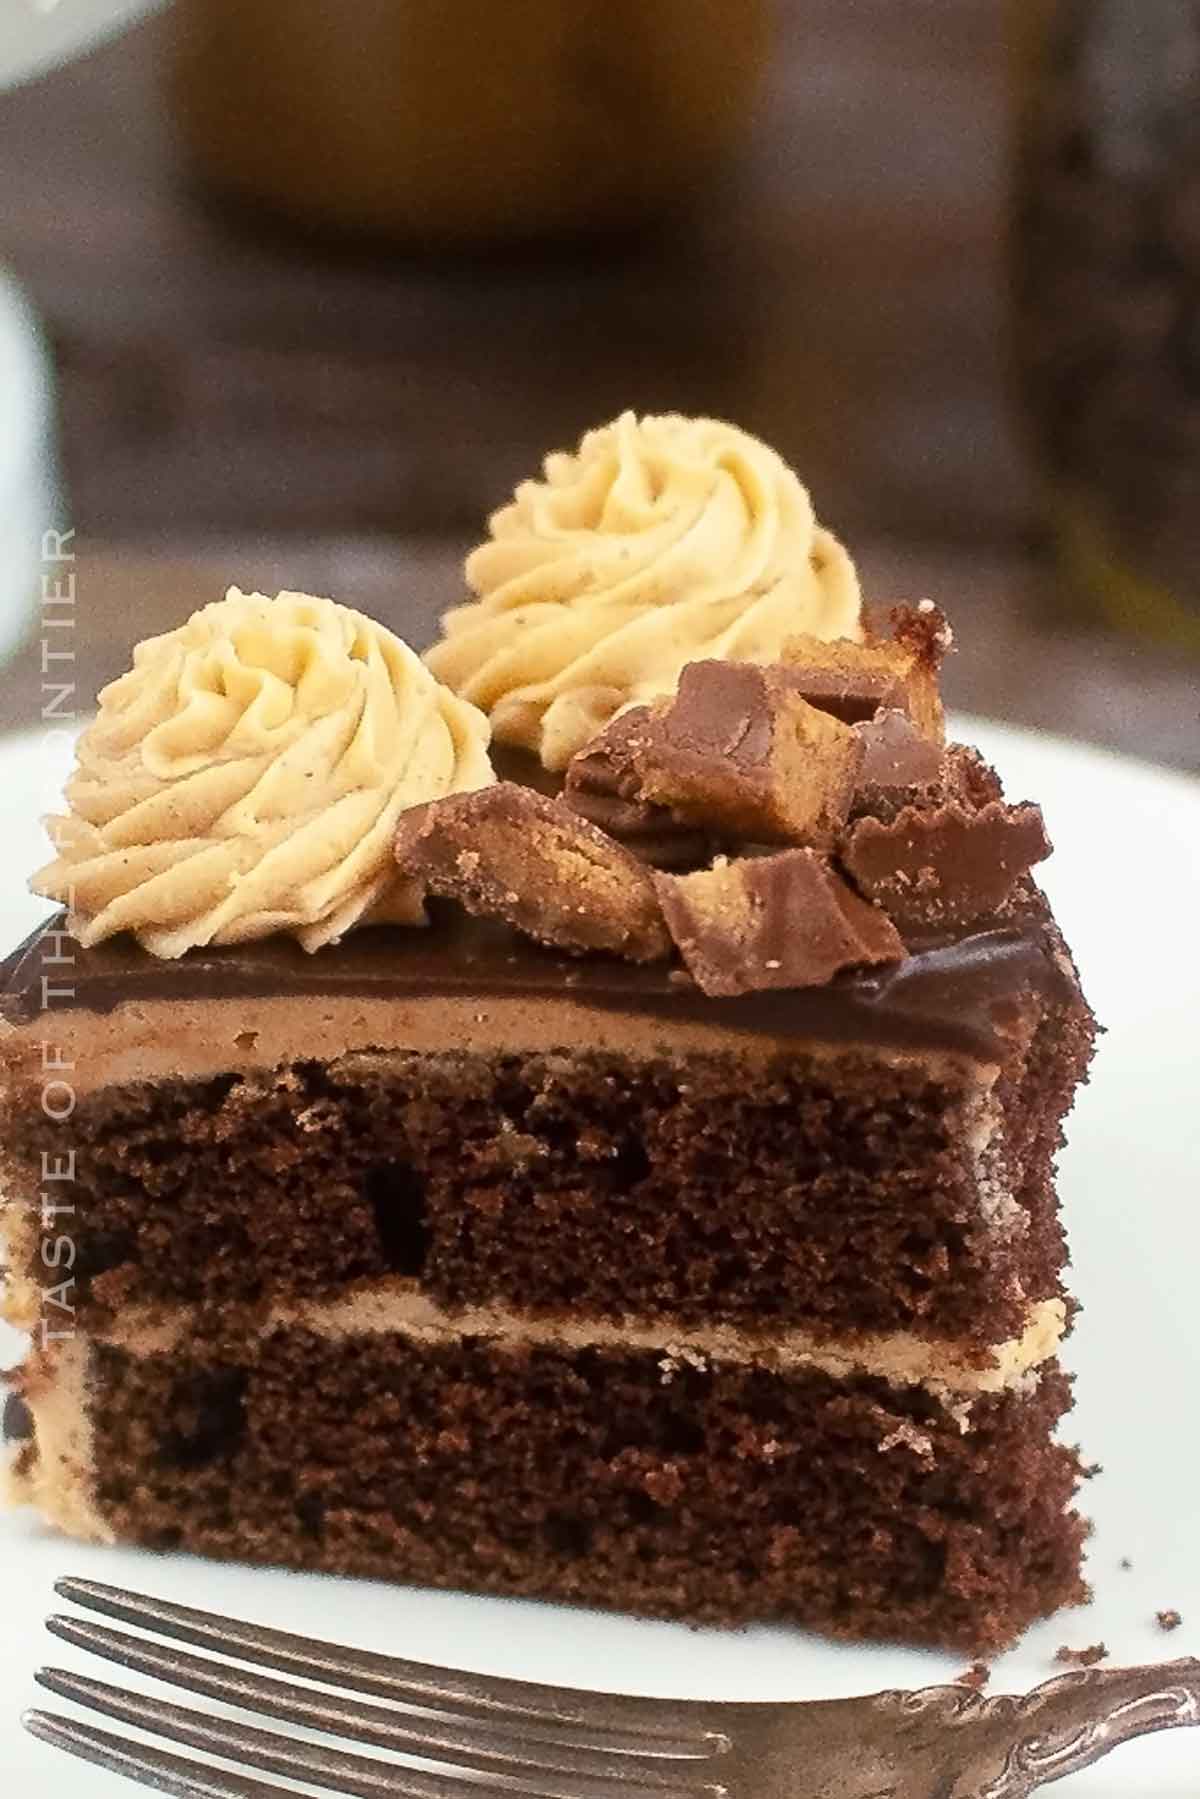 slice of Chocolate Cake with Peanut Butter Frosting